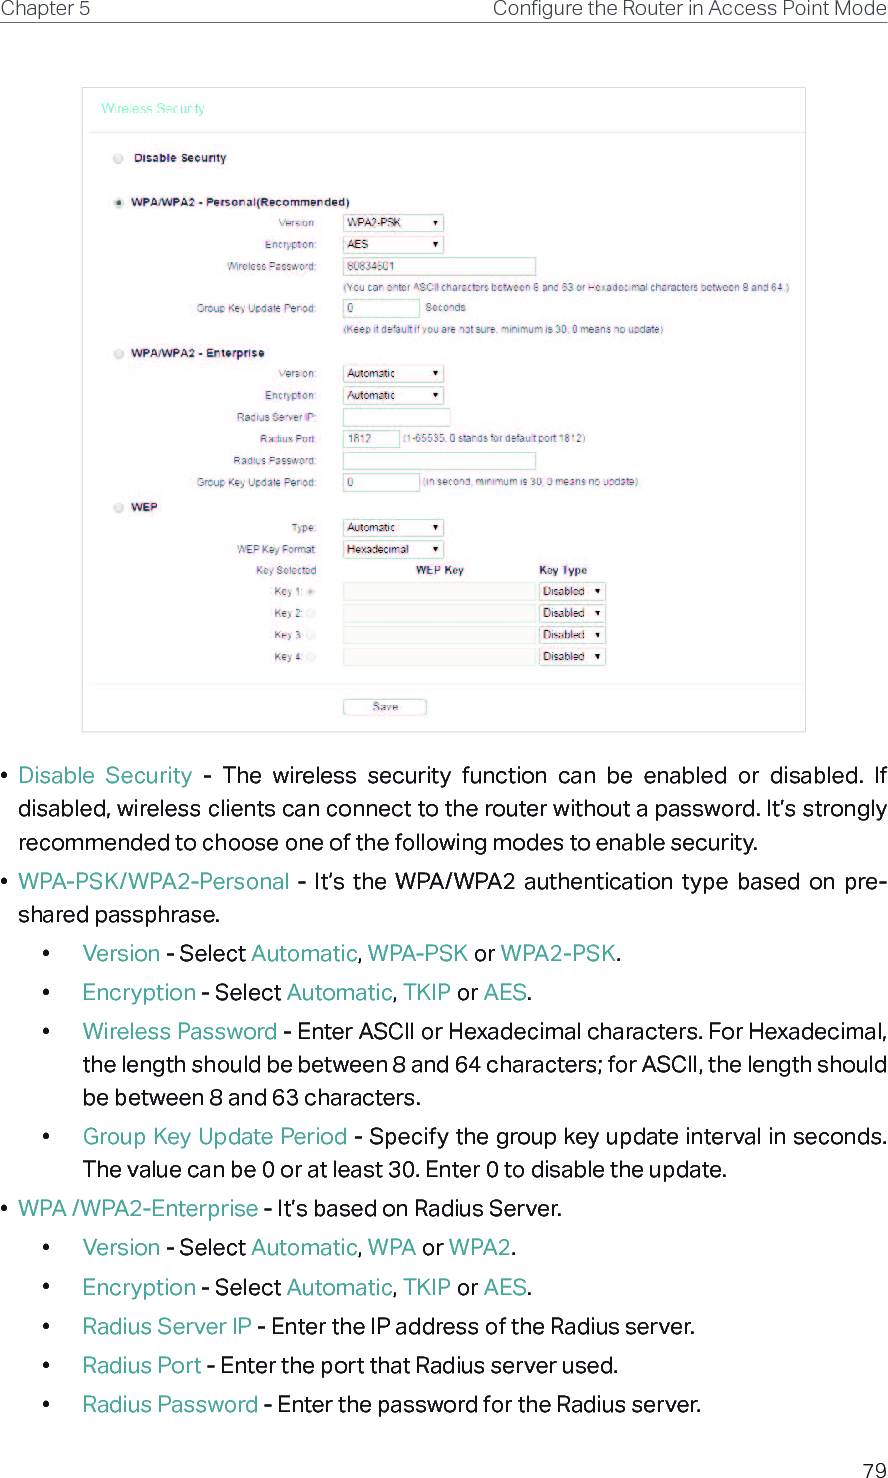 79Chapter 5 &amp;RQƮJXUHWKH5RXWHULQ$FFHVV3RLQW0RGH•  Disable  Security  -  The  wireless  security  function  can  be  enabled  or  disabled.  If disabled, wireless clients can connect to the router without a password. It’s strongly recommended to choose one of the following modes to enable security.•  WPA-PSK/WPA2-Personal  -  It’s  the  WPA/WPA2  authentication  type  based  on  pre-shared passphrase. •  Version - Select Automatic, WPA-PSK or WPA2-PSK.•  Encryption - Select Automatic, TKIP or AES.•  Wireless Password - Enter ASCII or Hexadecimal characters. For Hexadecimal, the length should be between 8 and 64 characters; for ASCII, the length should be between 8 and 63 characters.•  Group Key Update Period - Specify the group key update interval in seconds. The value can be 0 or at least 30. Enter 0 to disable the update.•  WPA /WPA2-Enterprise - It’s based on Radius Server.•  Version - Select Automatic, WPA or WPA2.•  Encryption - Select Automatic, TKIP or AES.•  Radius Server IP - Enter the IP address of the Radius server.•  Radius Port - Enter the port that Radius server used.•  Radius Password - Enter the password for the Radius server.